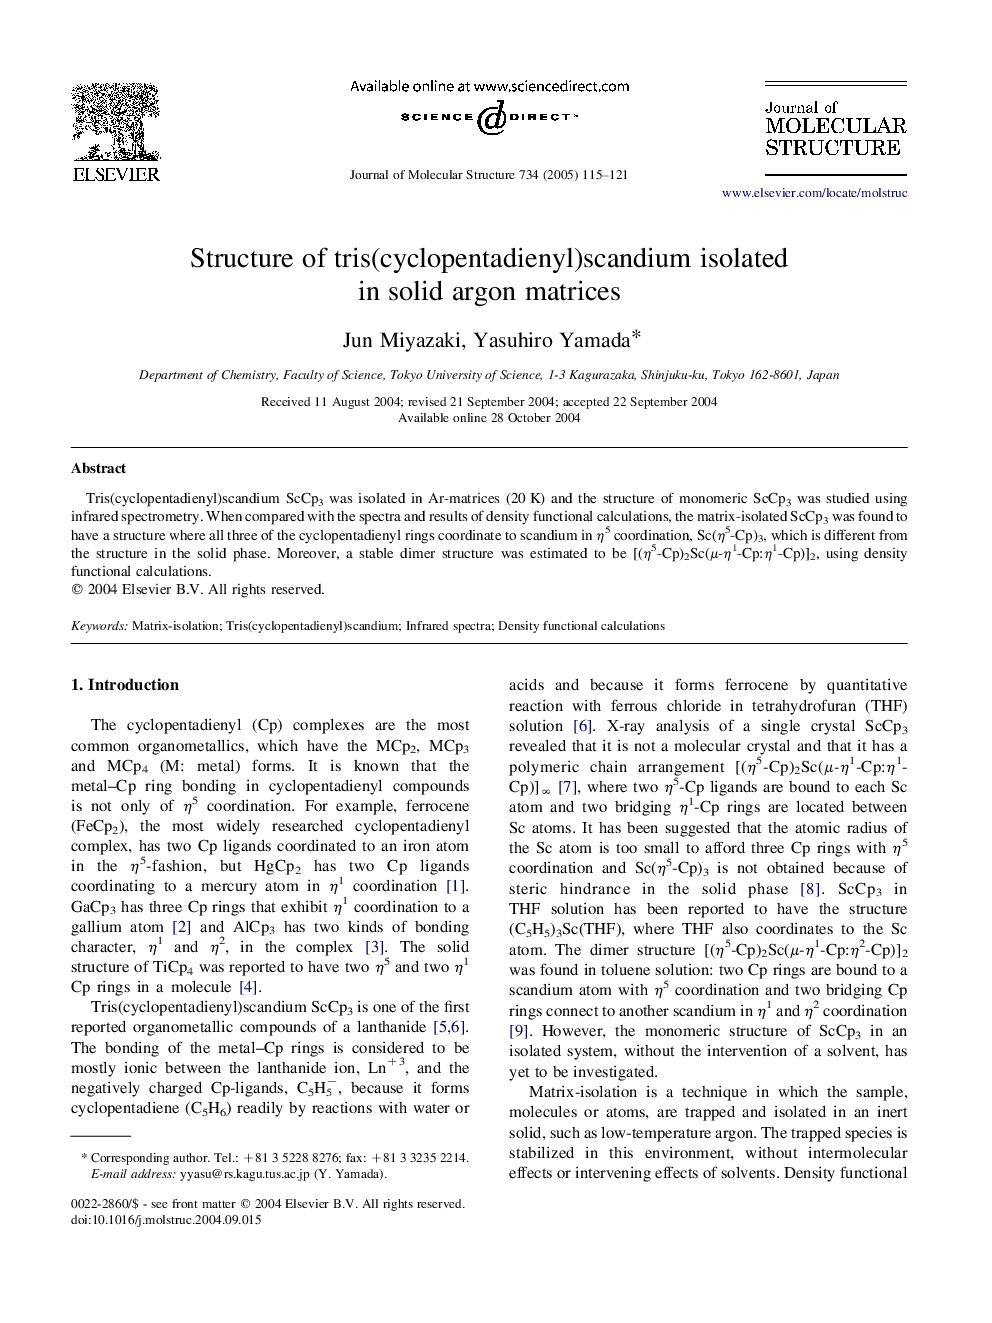 Structure of tris(cyclopentadienyl)scandium isolated in solid argon matrices